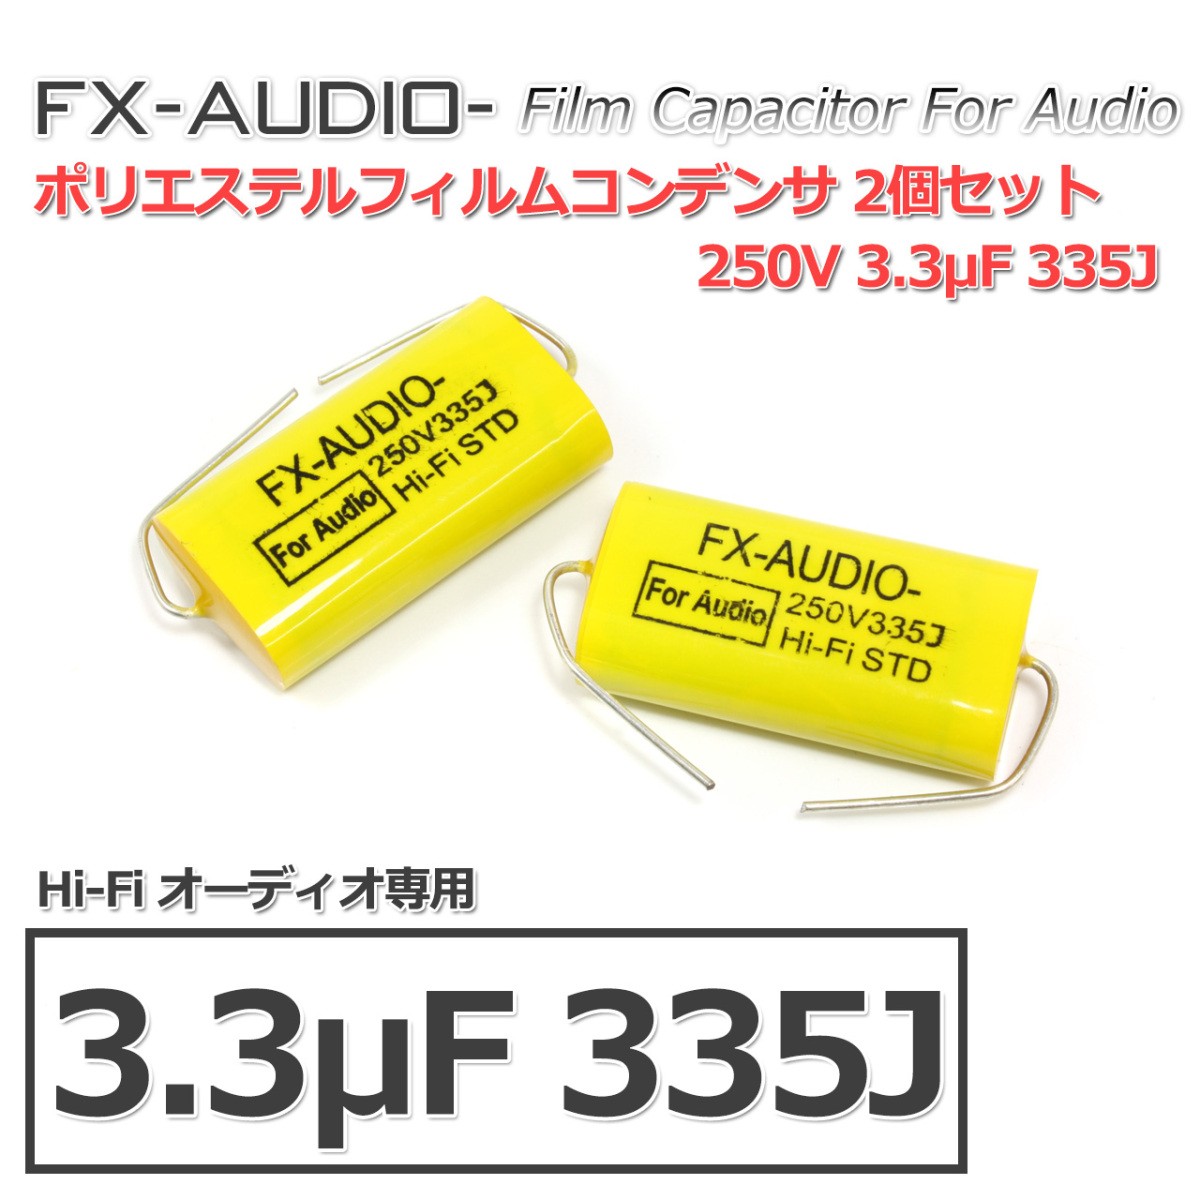 FX-AUDIO- limitated production product exclusive use audio for polyester film condenser 250V 3.3μF 335J 2 piece set network . tweeter for also 